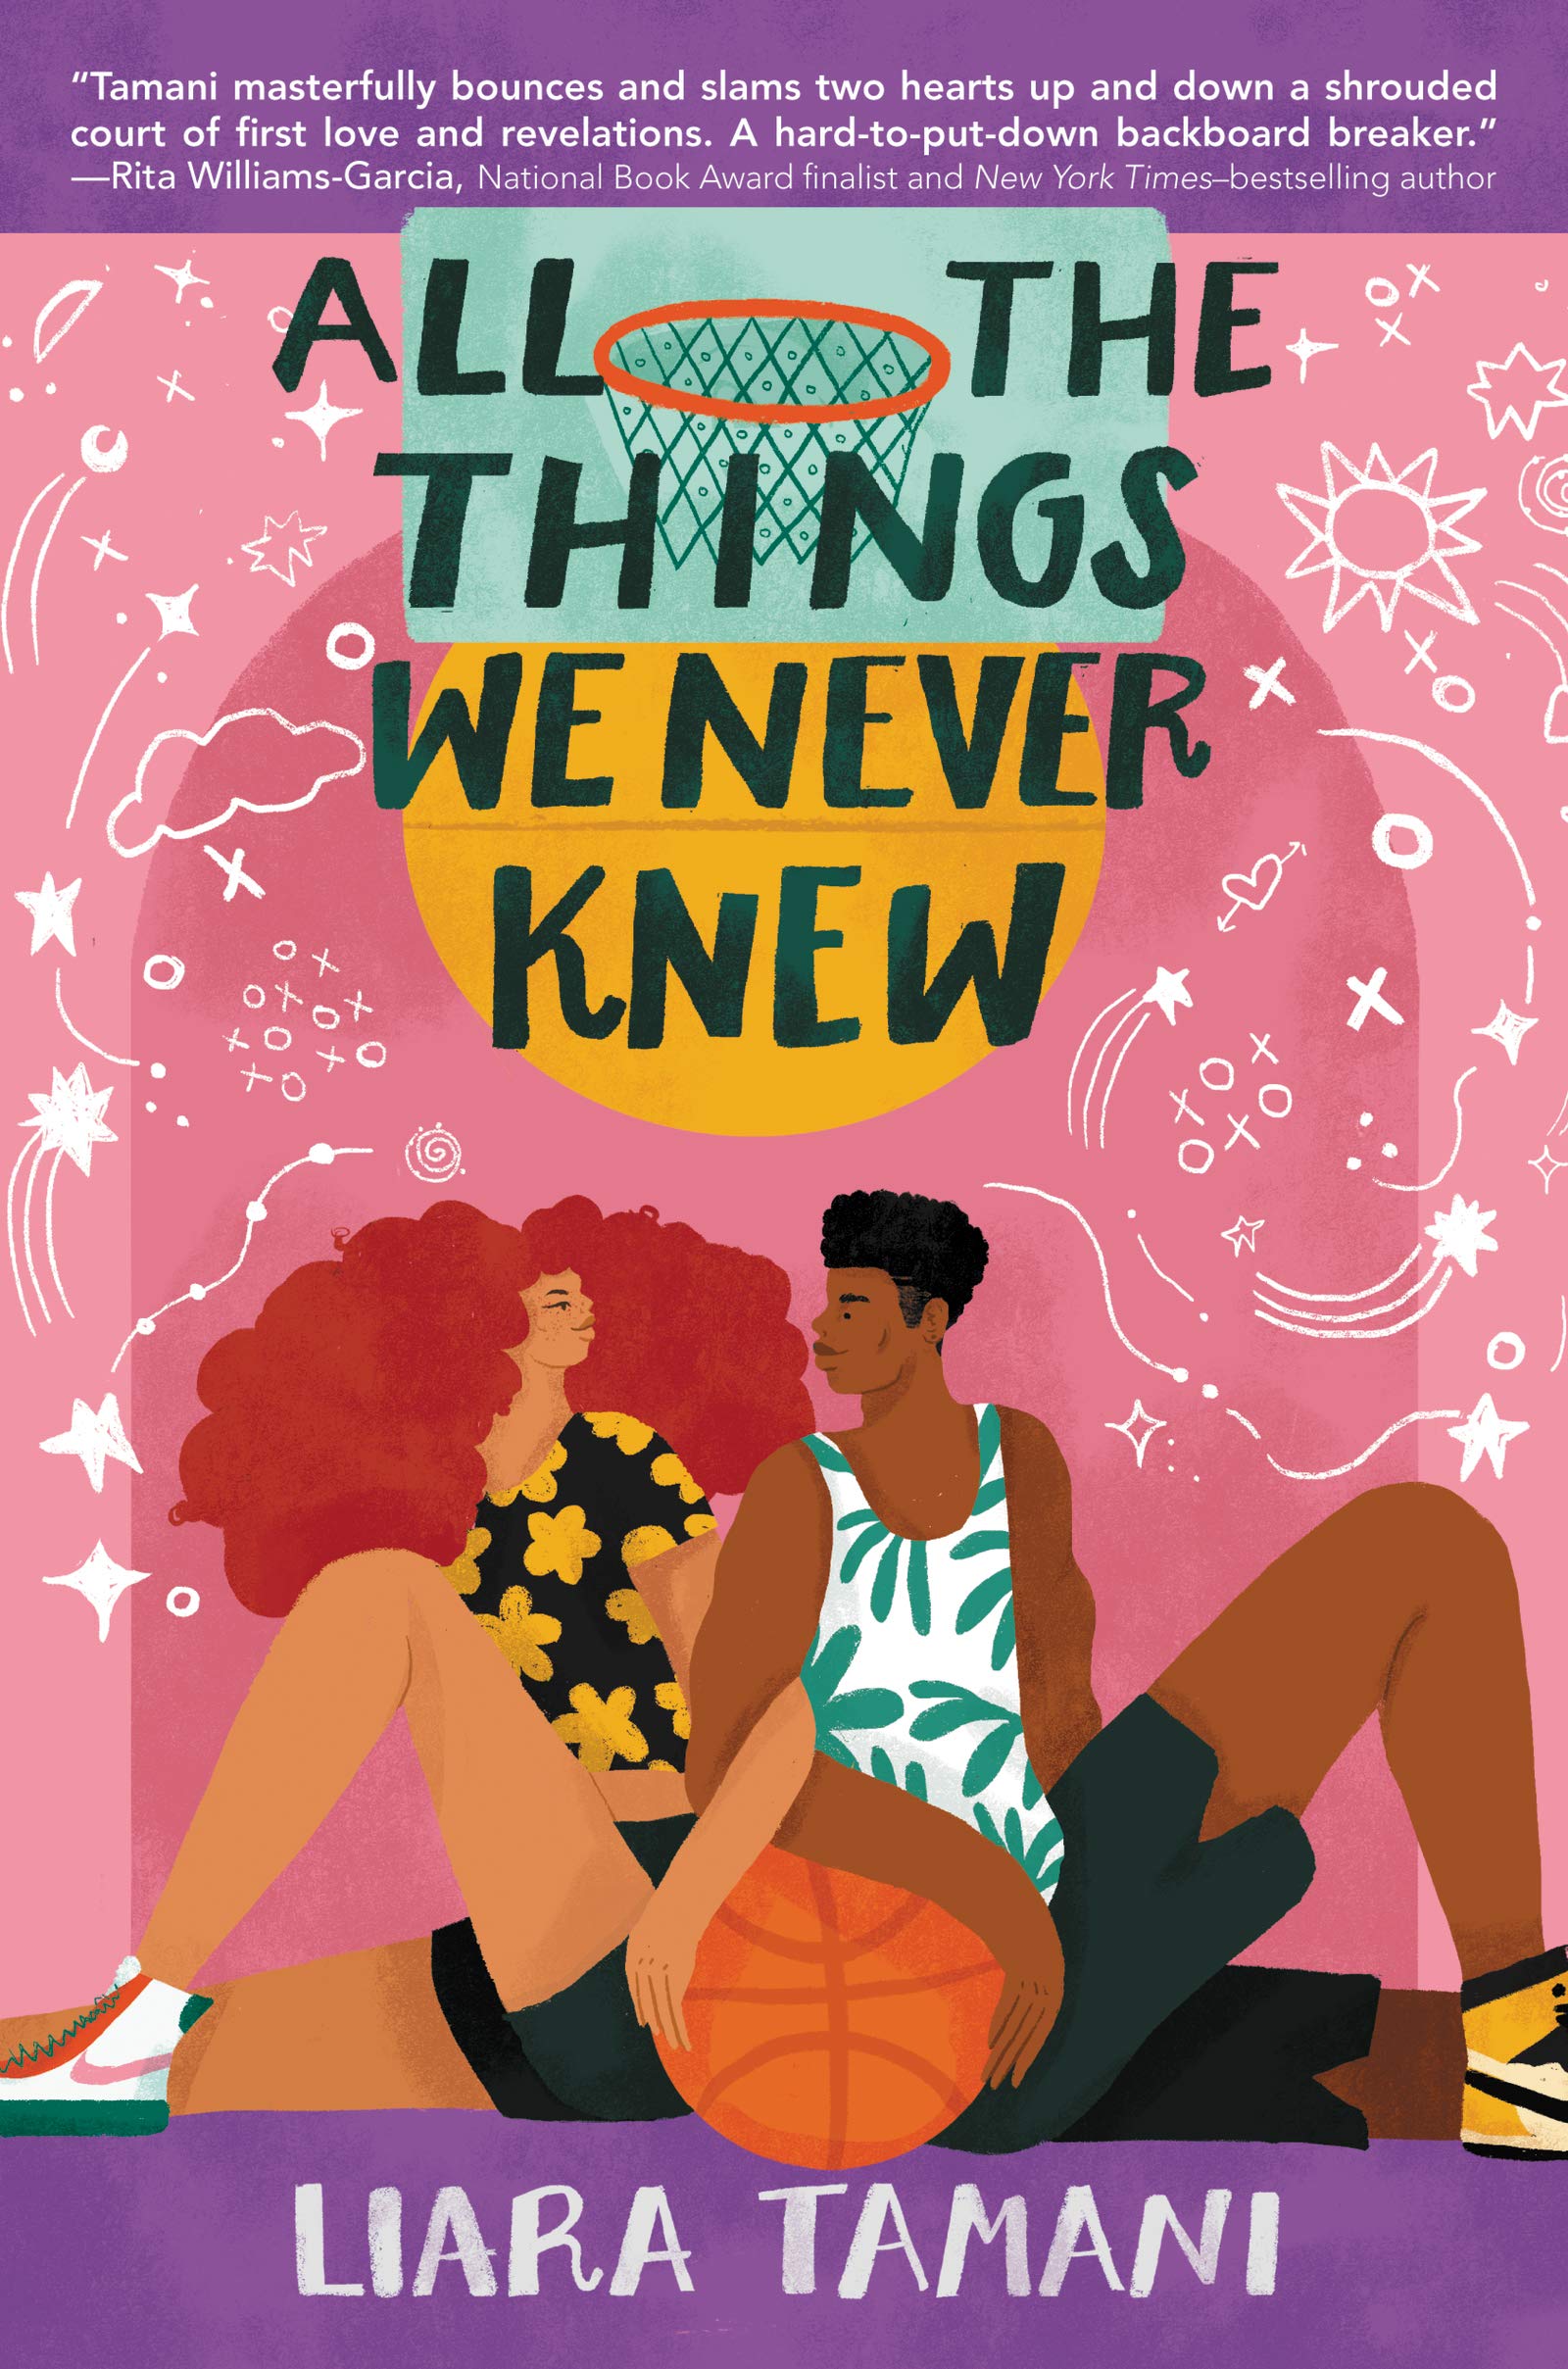 #SummerReads: 14 Books By Black Authors To Add To Your Bookshelf